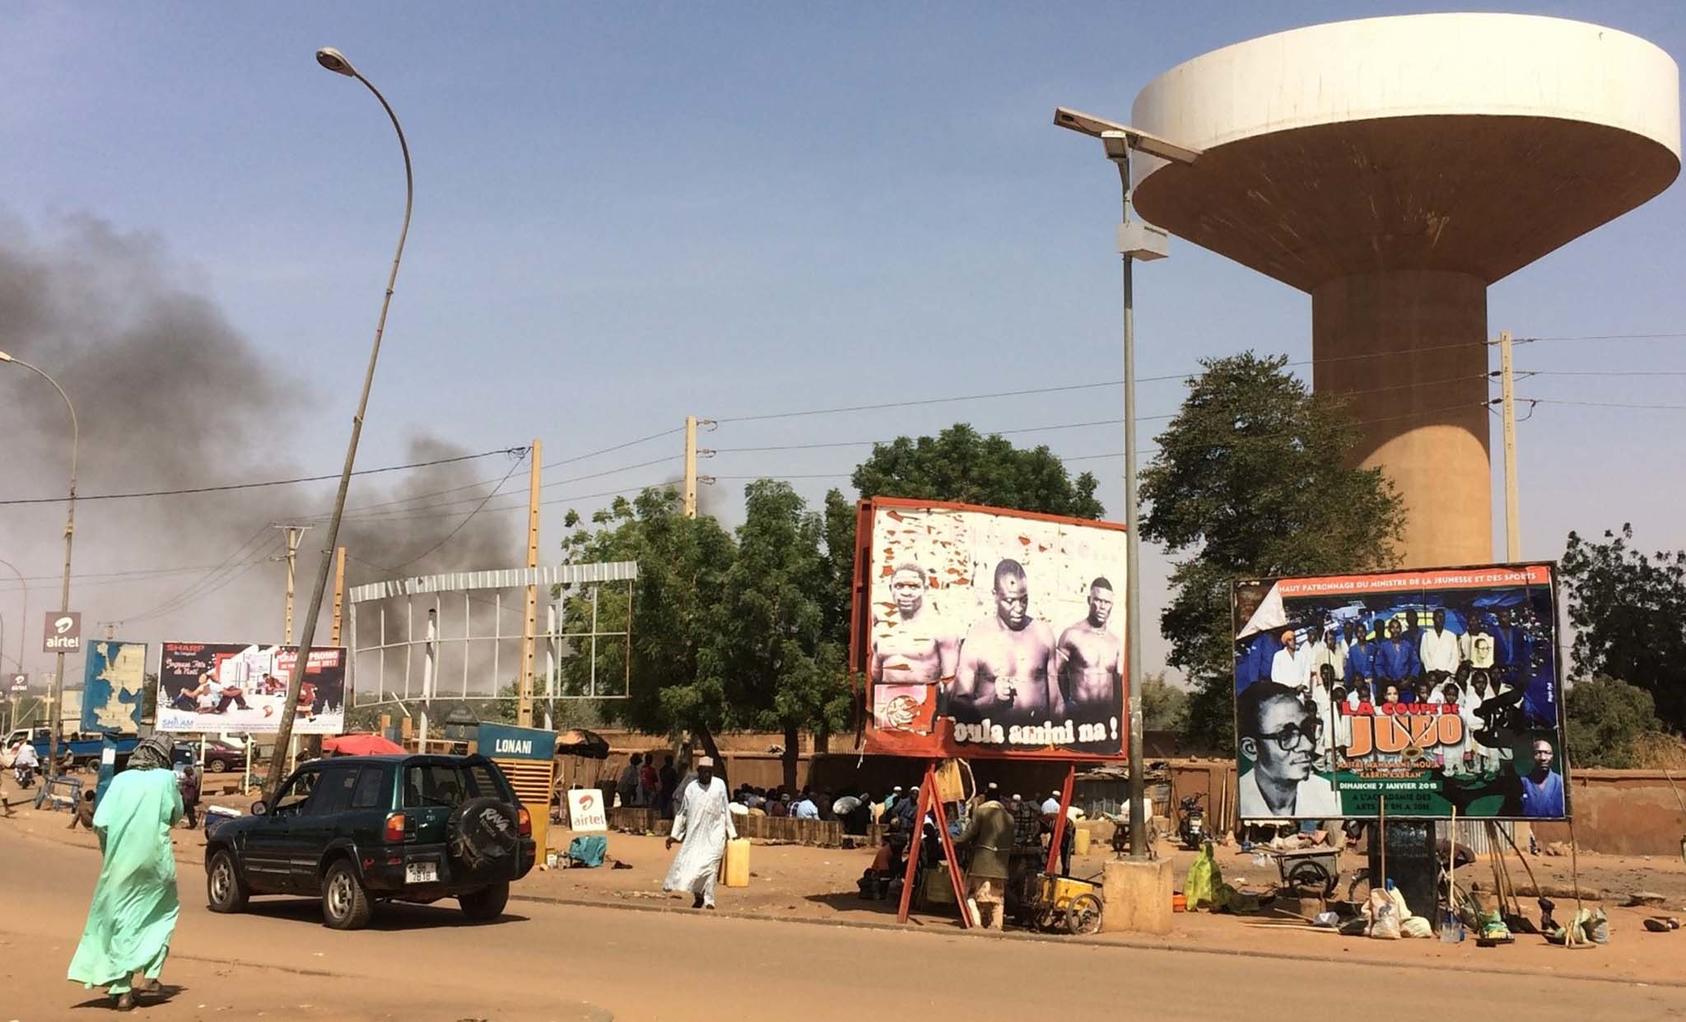 Men walk on the street or huddle in the shade of trees and billboards to eat lunch on a main street of Niamey V, one of the Nigerien capital’s poorest districts. Residents have improved security through community dialogues. (CC License 4.0/NigerTZai)